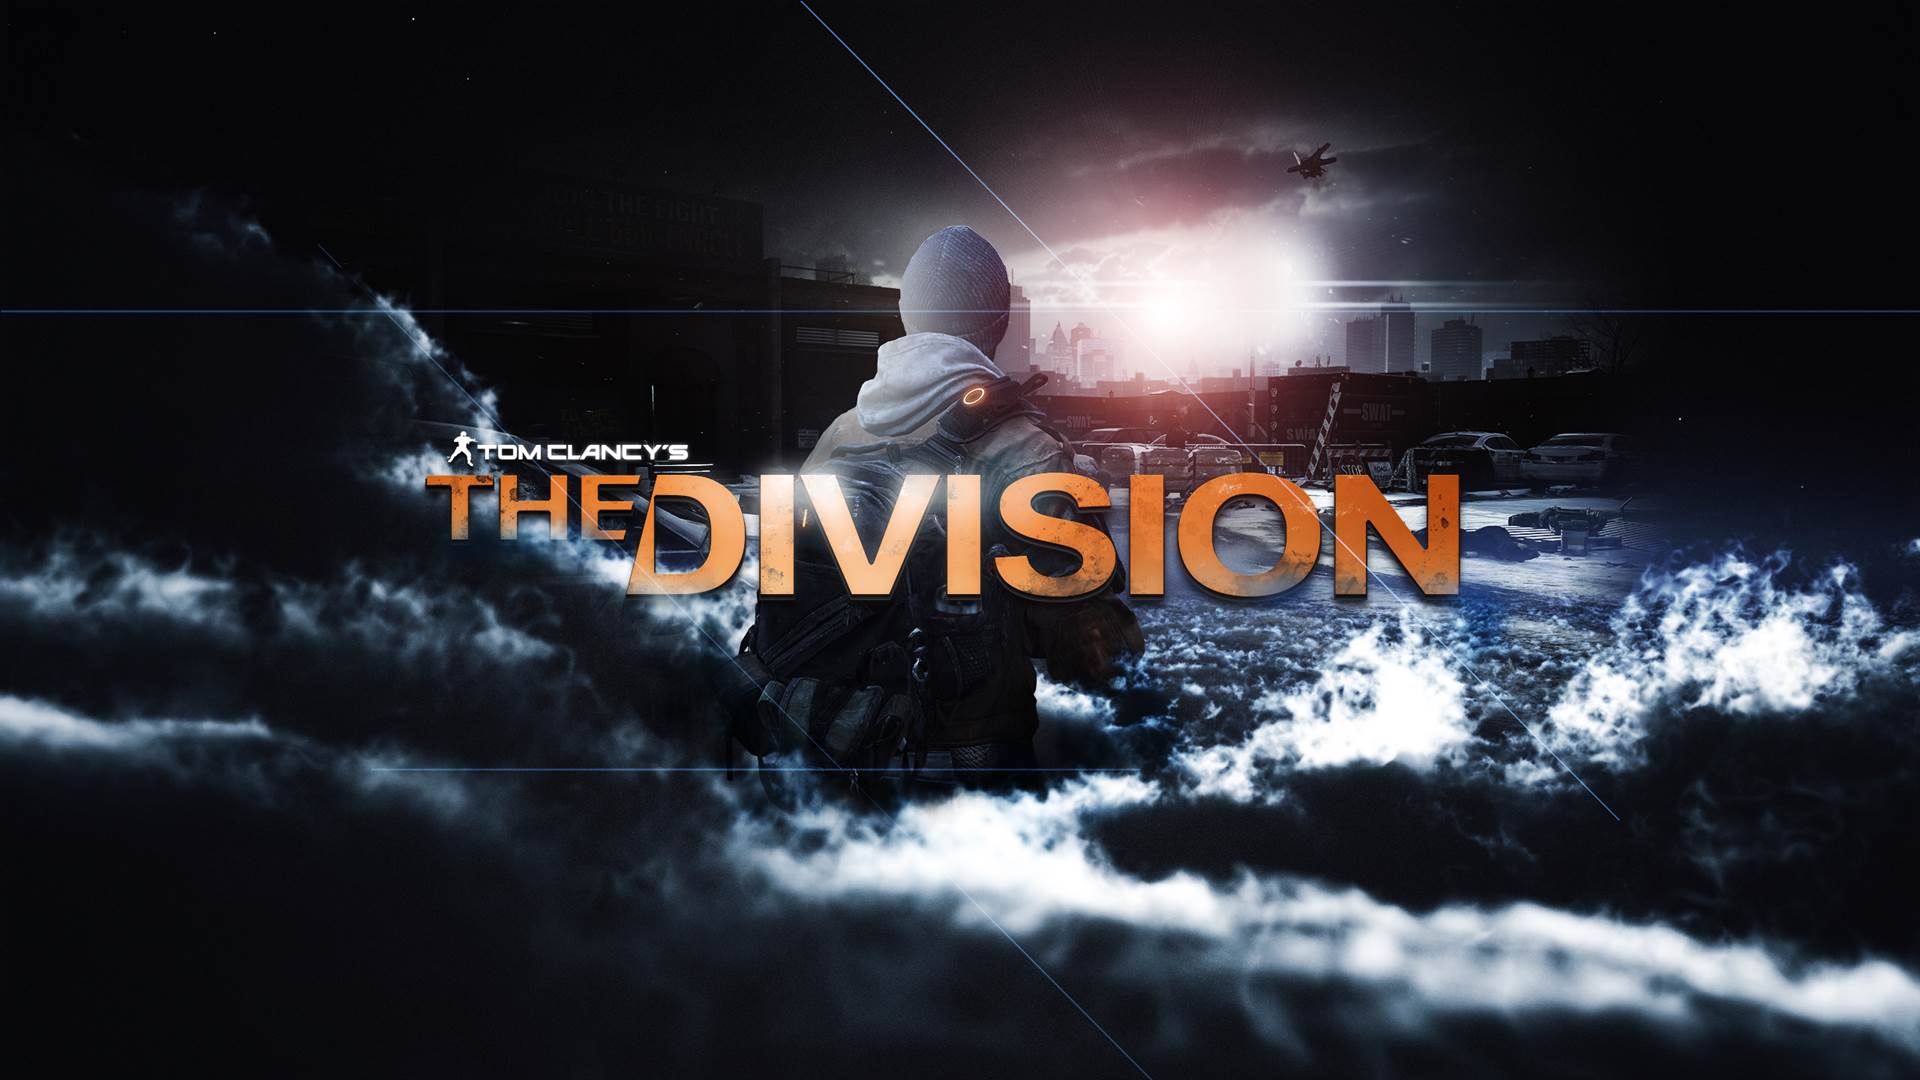 Tom-Clancys-The-Division-HD-Wallpaper.jp